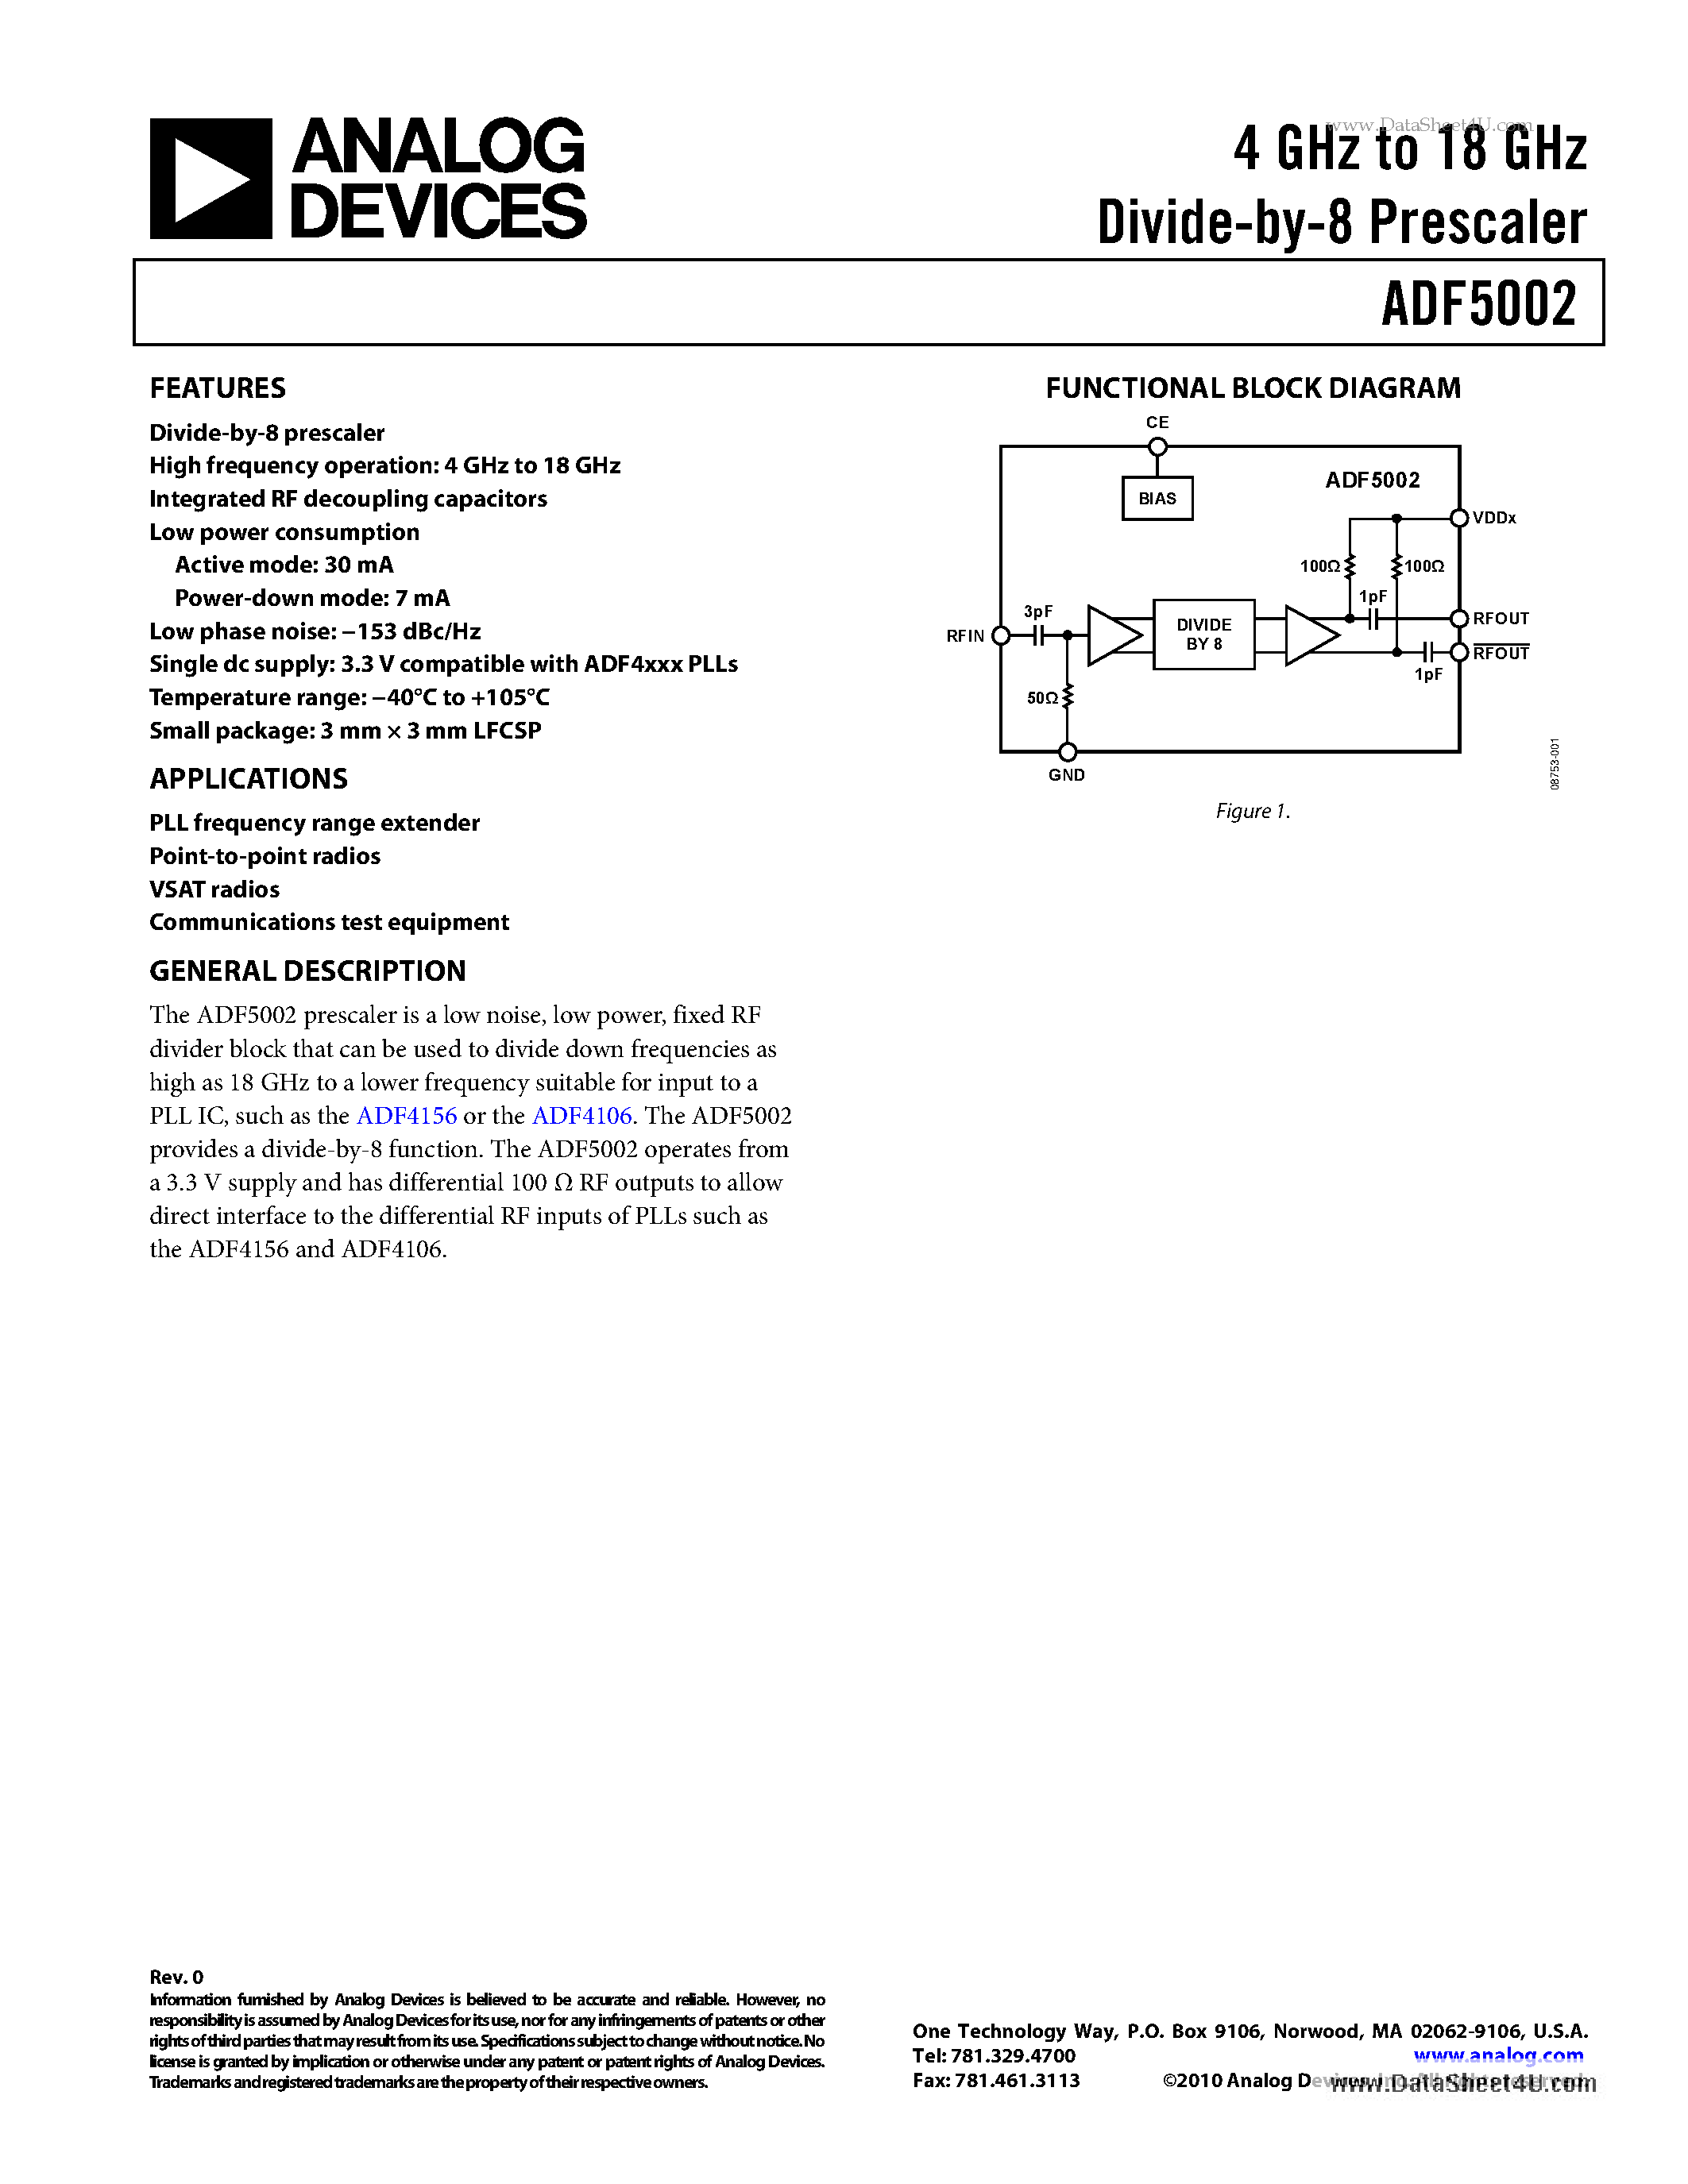 Datasheet ADF5002 - 4GHz to 18GHz Divide-by-8 Prescaler page 1